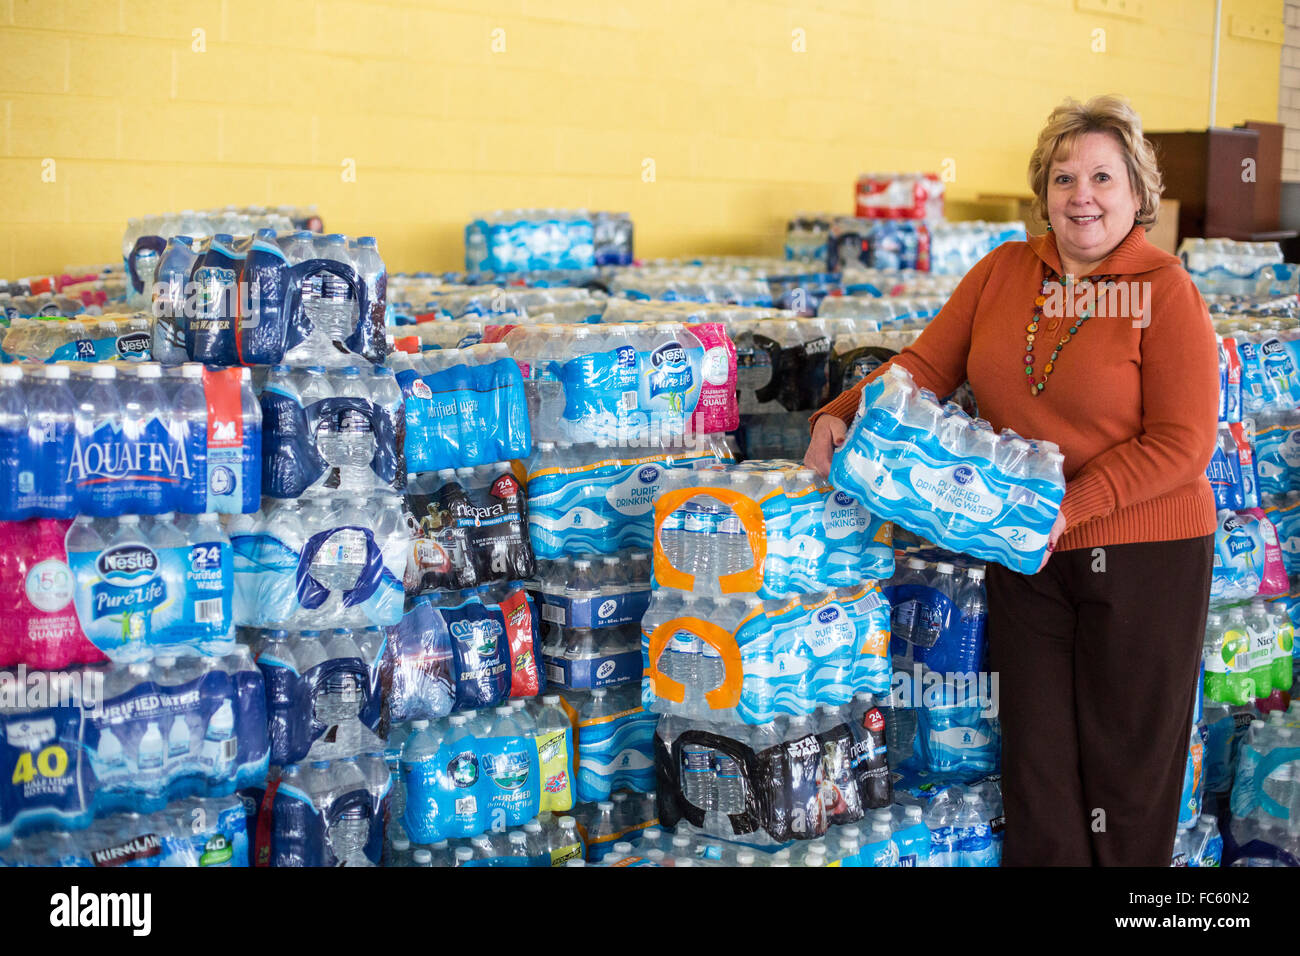 Flint, Michigan - Bottled water distributed through Catholic Charities because of lead in the city's drinking water. Stock Photo